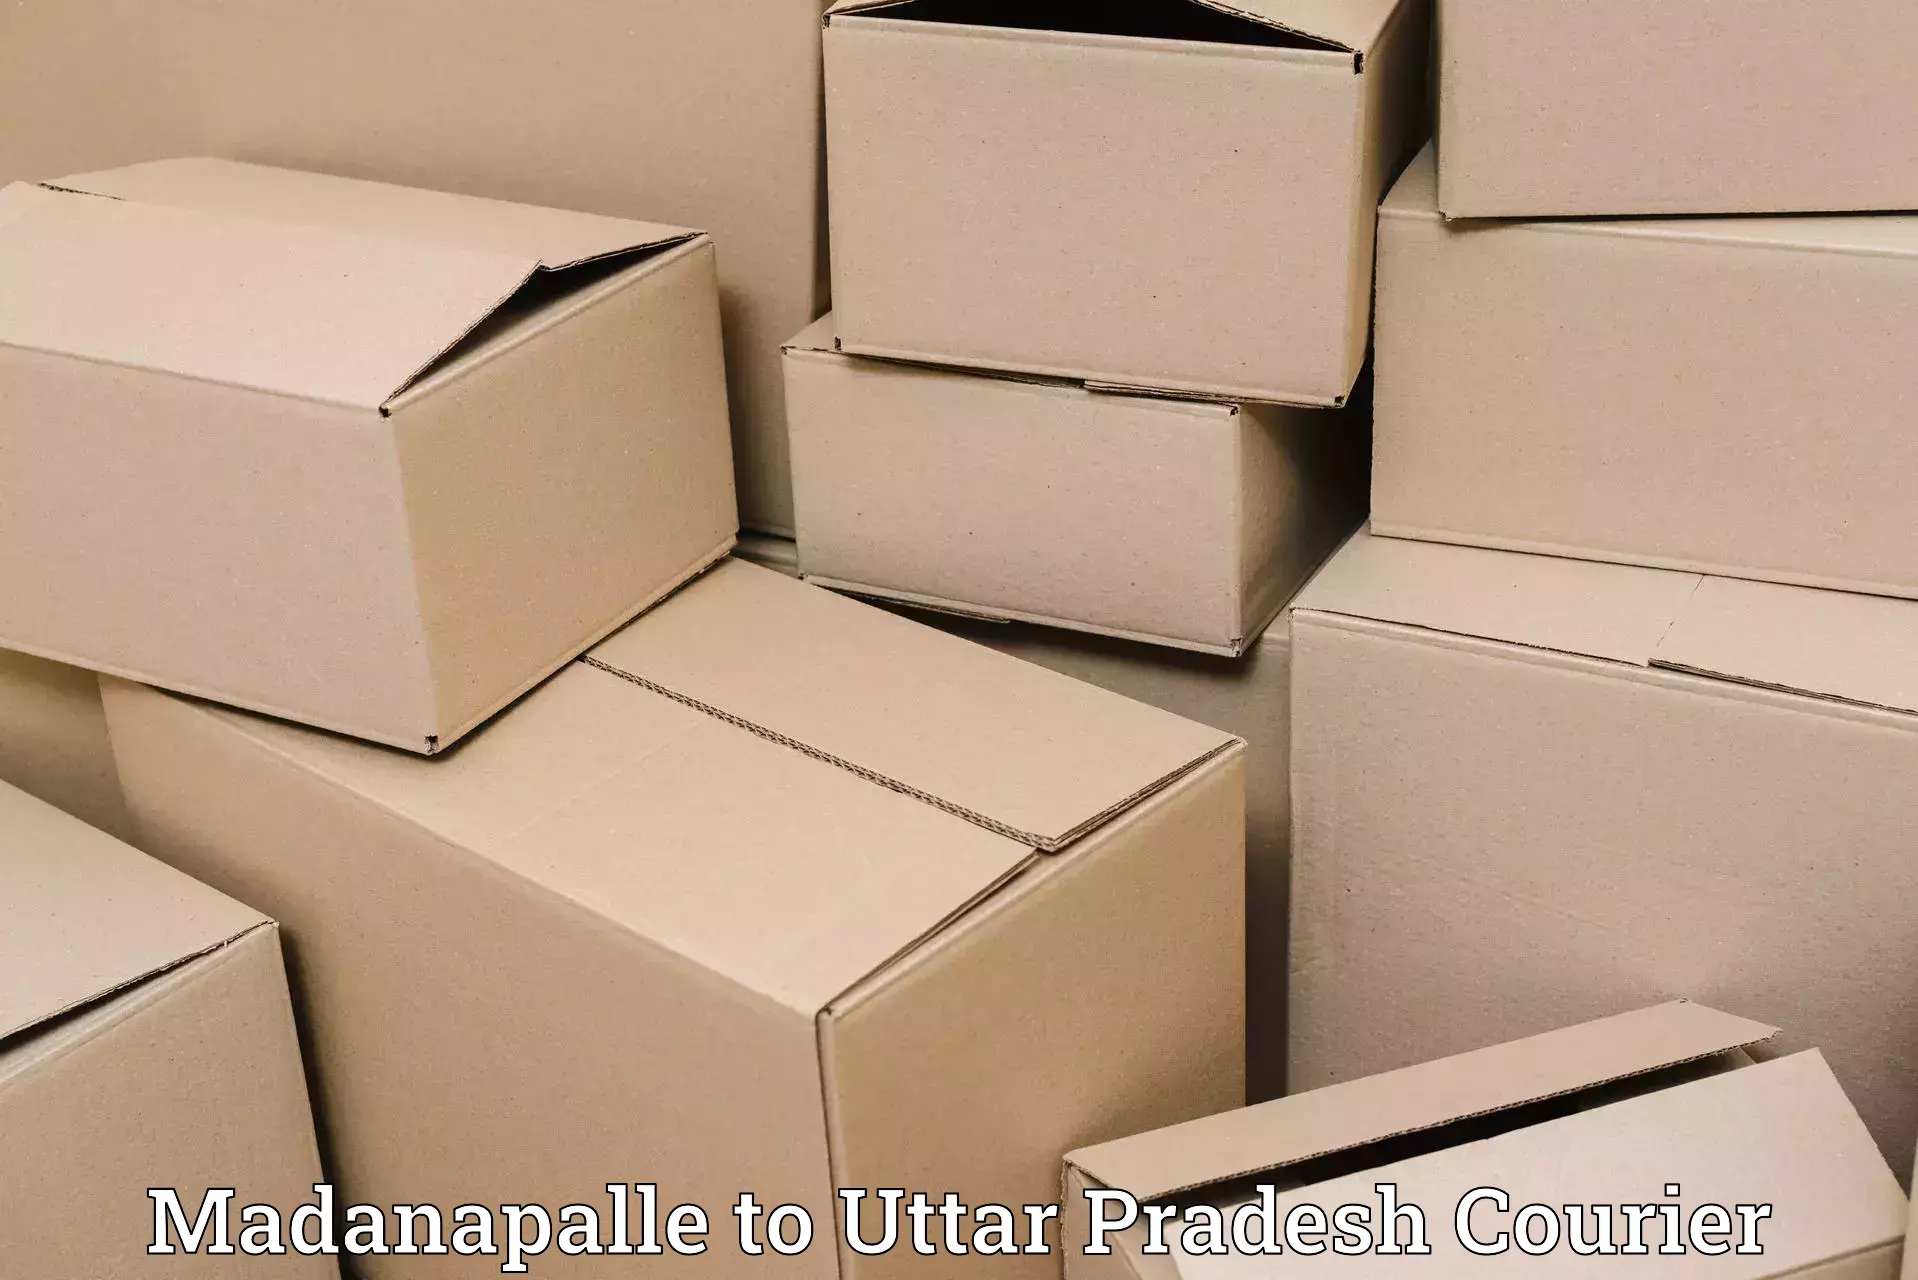 Flexible delivery scheduling Madanapalle to Siyana